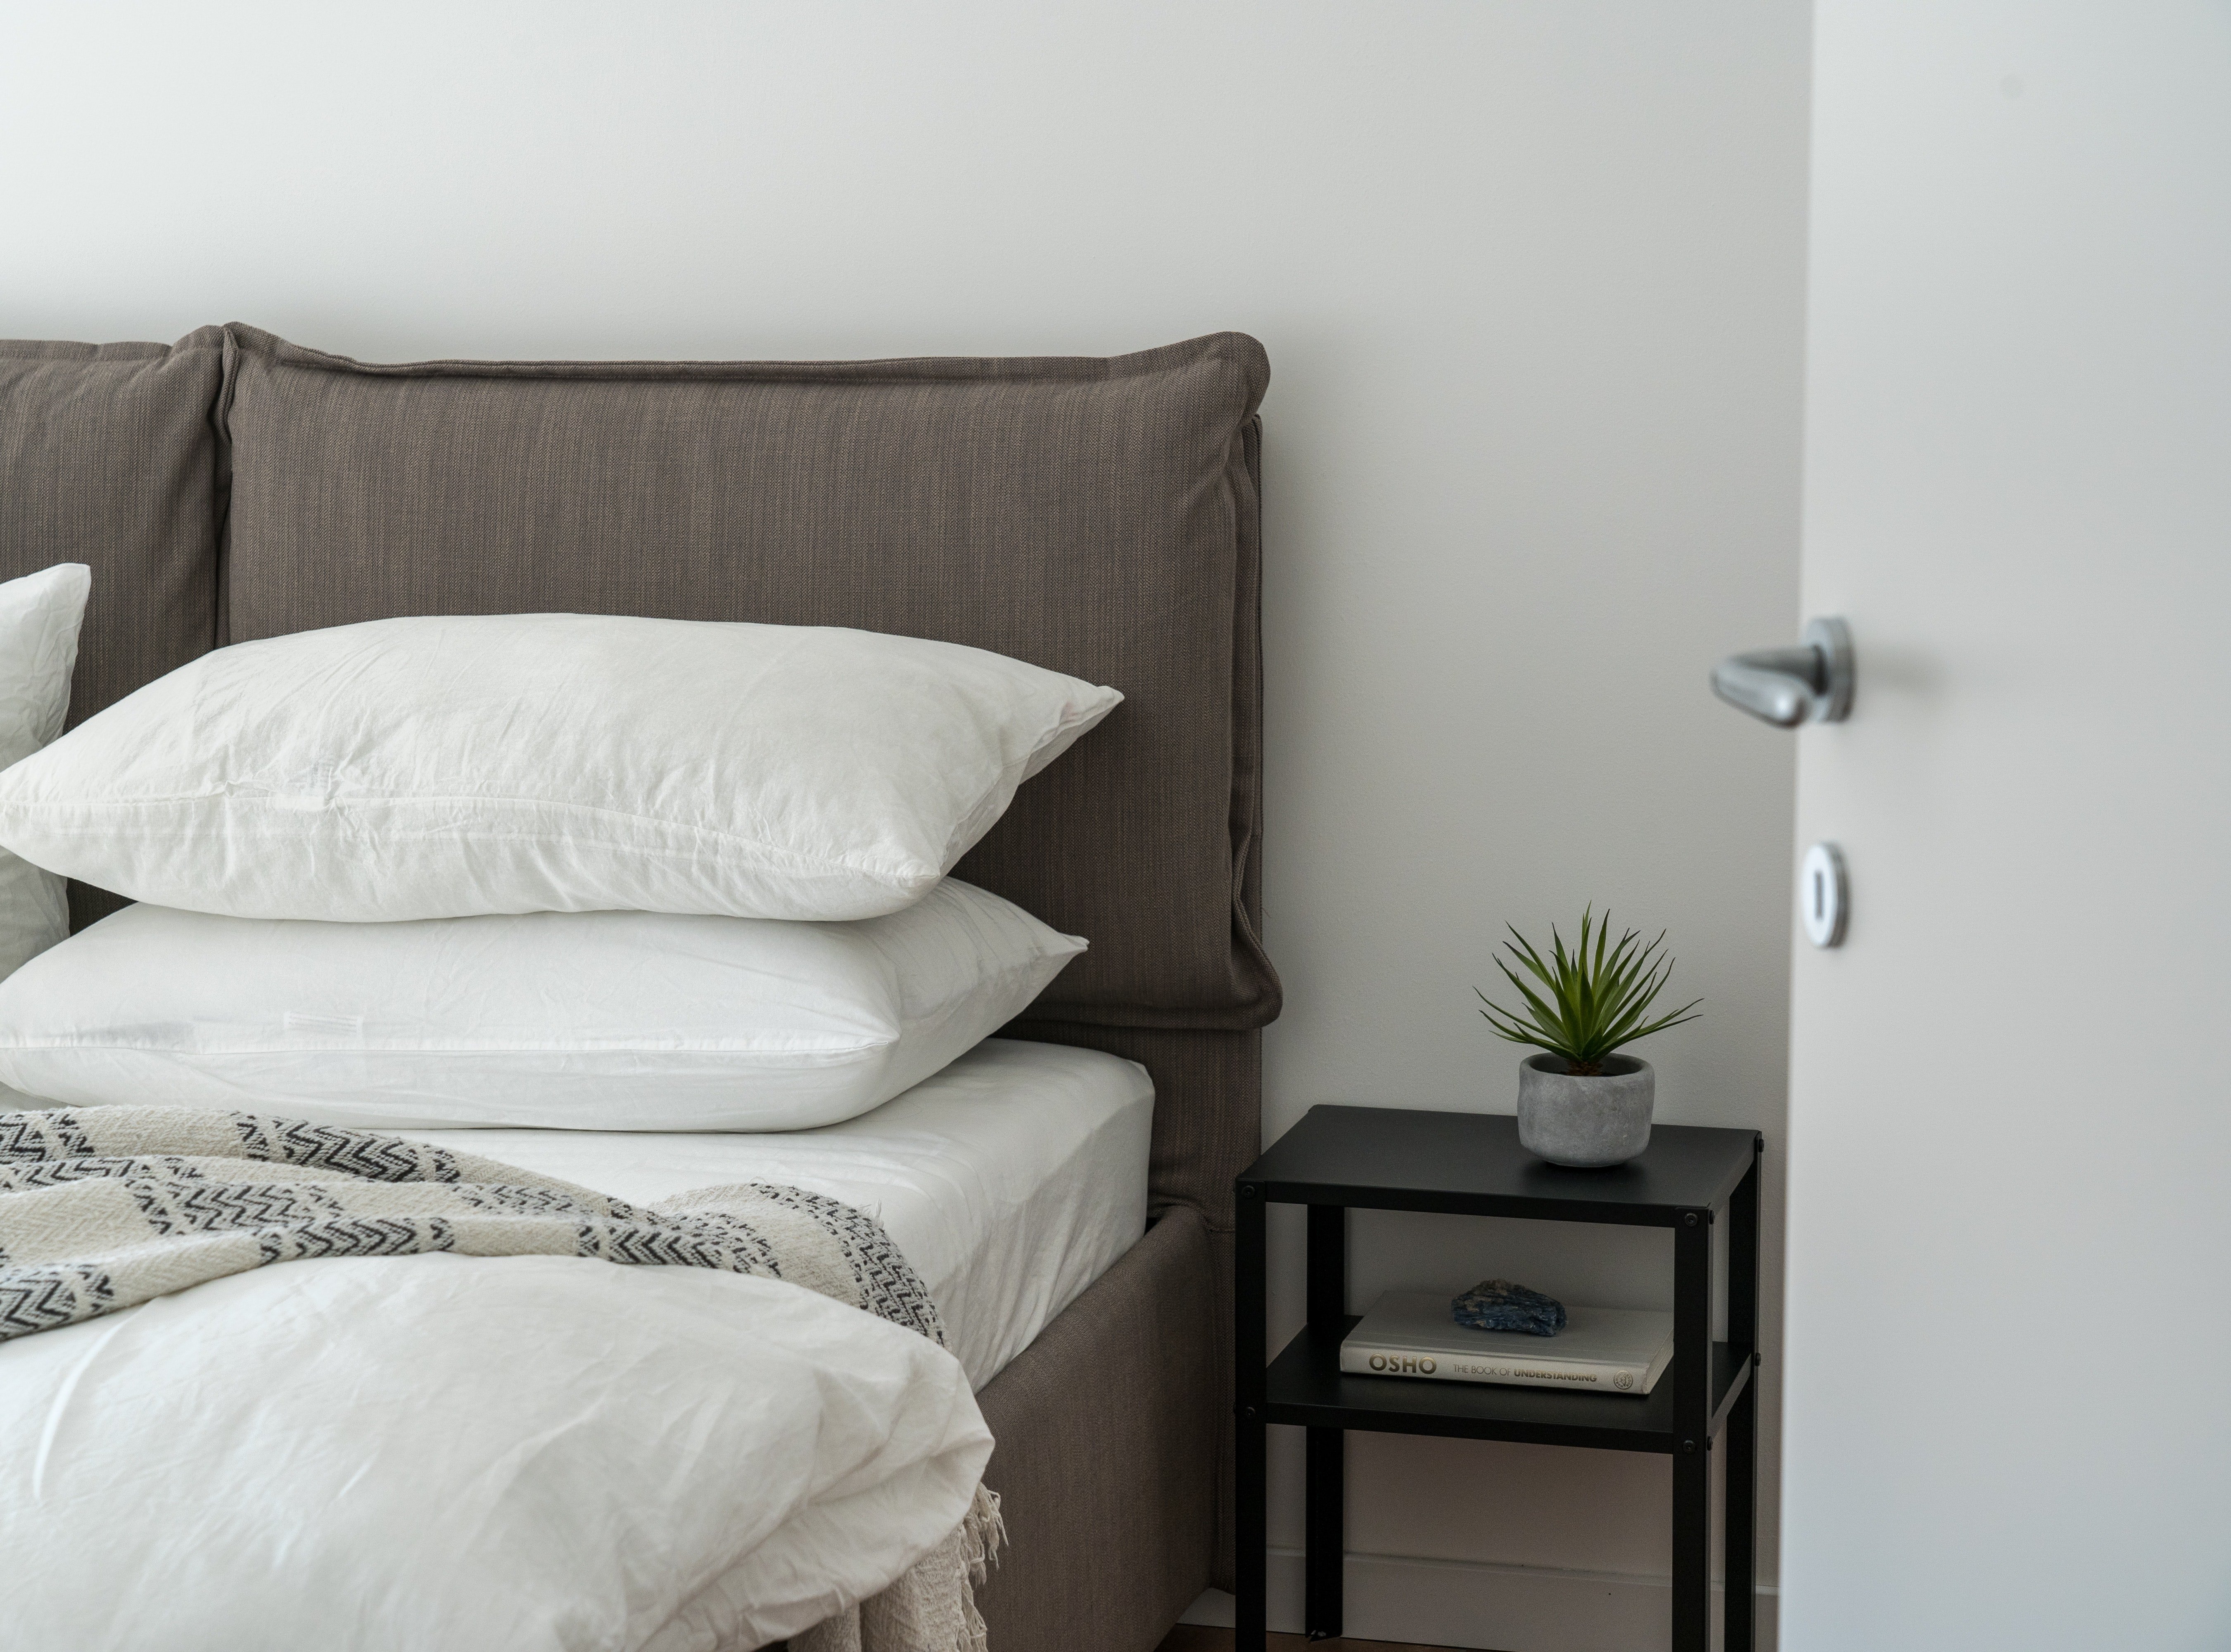 James and Anna prepared their guest bedroom for Nancy to sleep in. | Source: Pexels